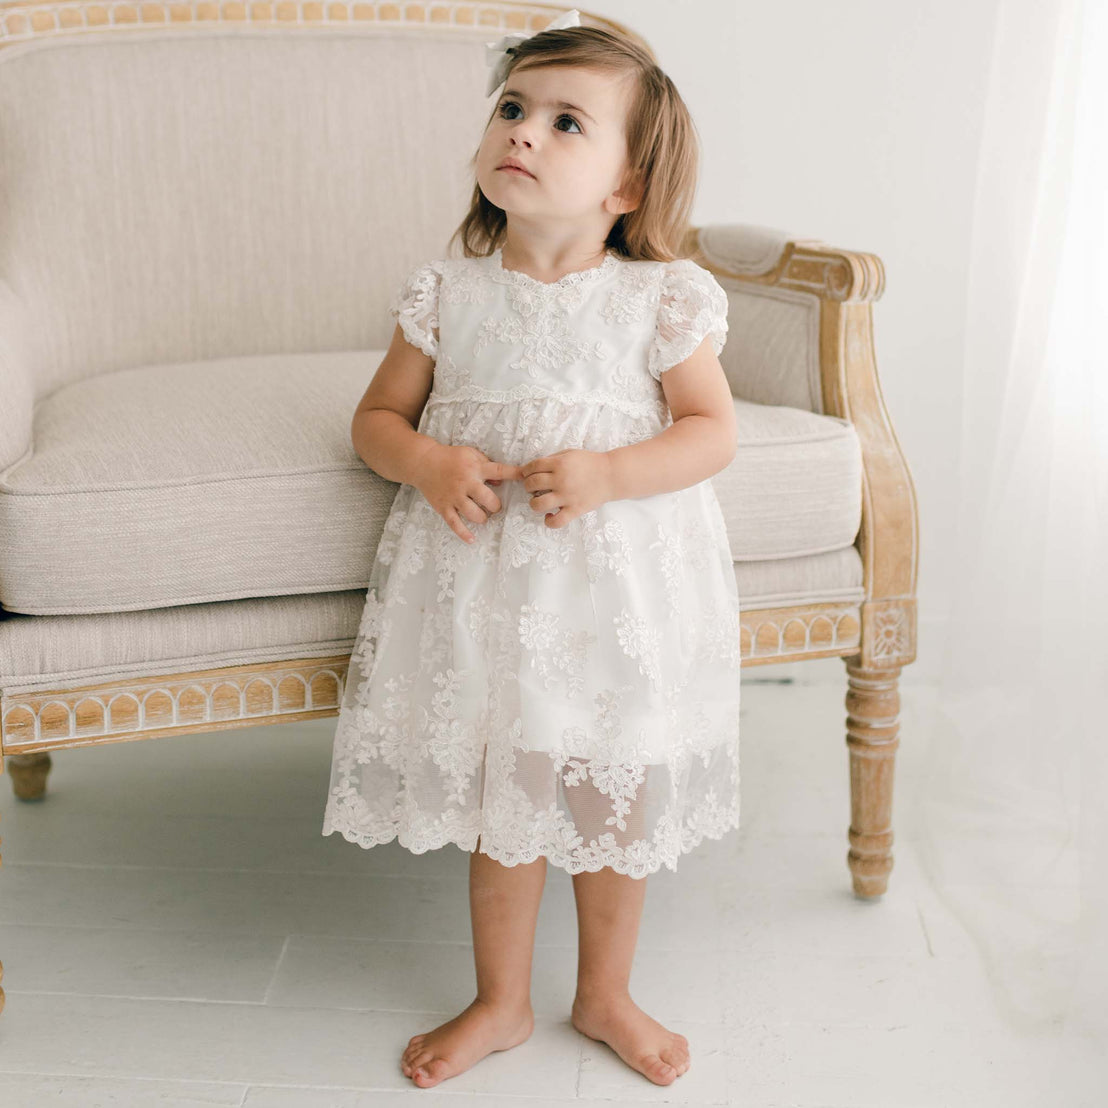 Young toddler standing by couch wearing the Penelope lace christening dress & bloomers.